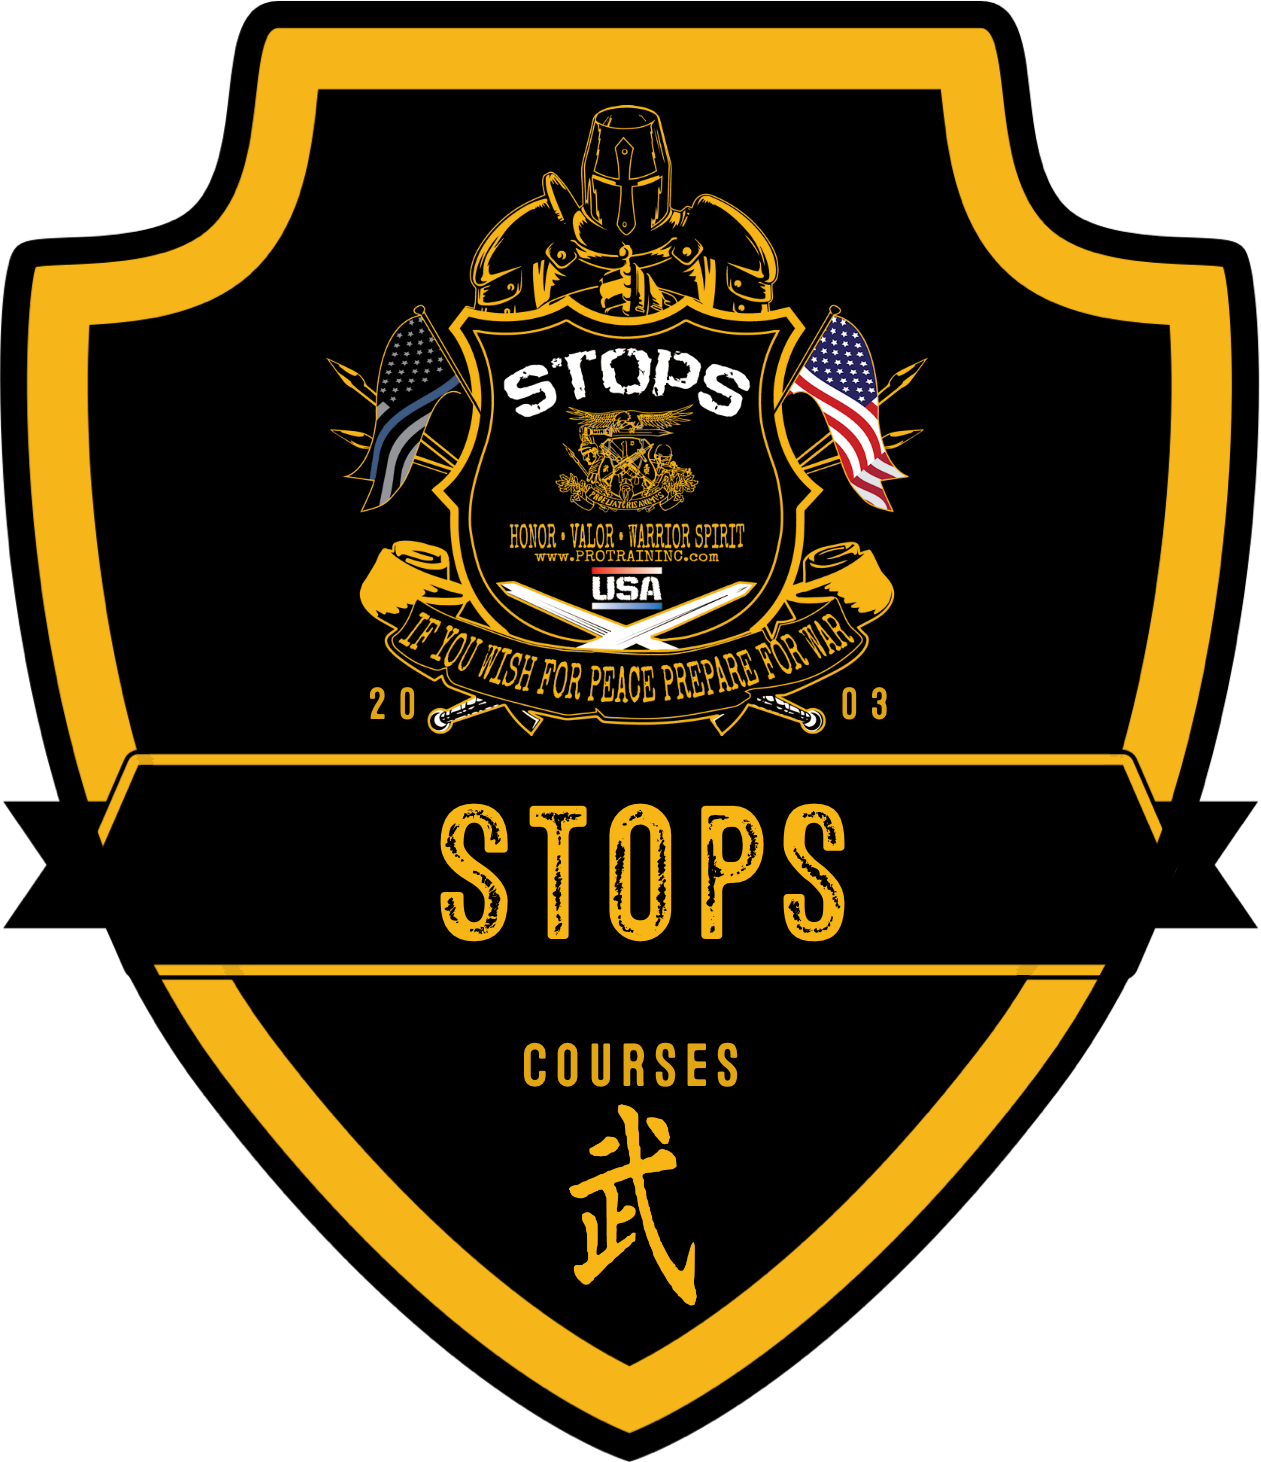 STOPS Courses